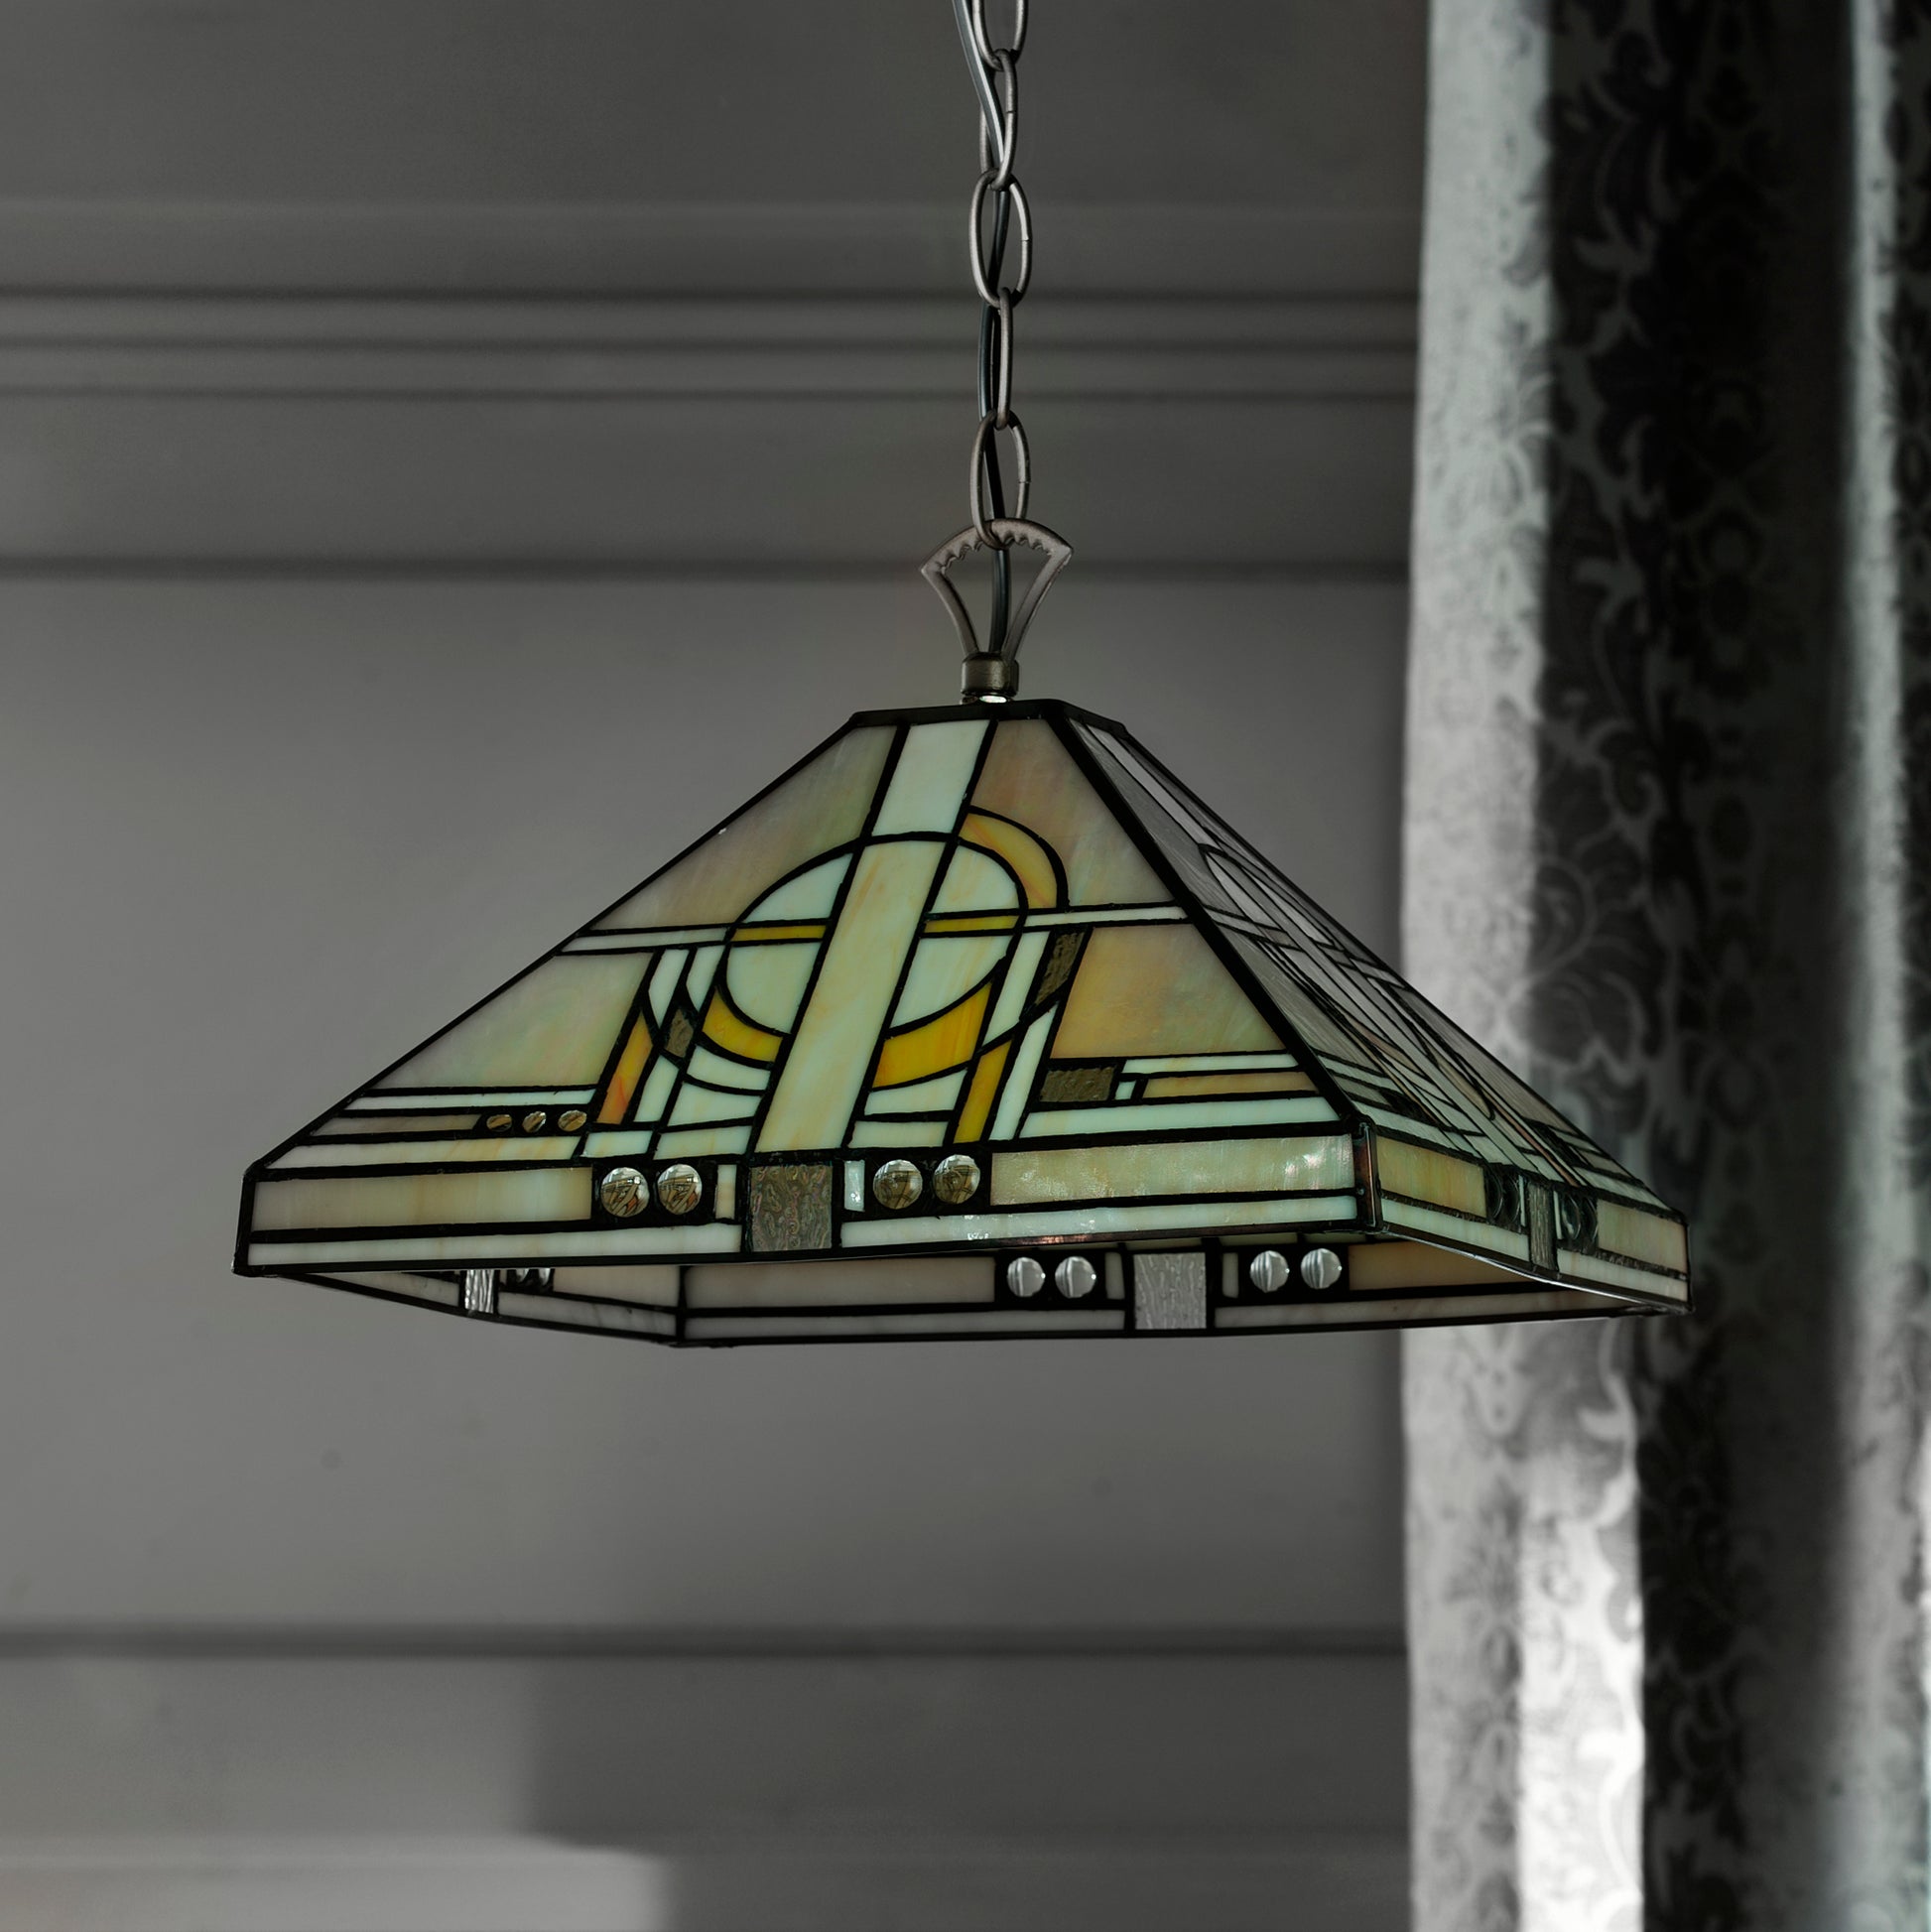 Khufu 1 Light Ceiling Pendant with a Tiffany style Glass Electrical Down light fitting (30 cm Width)